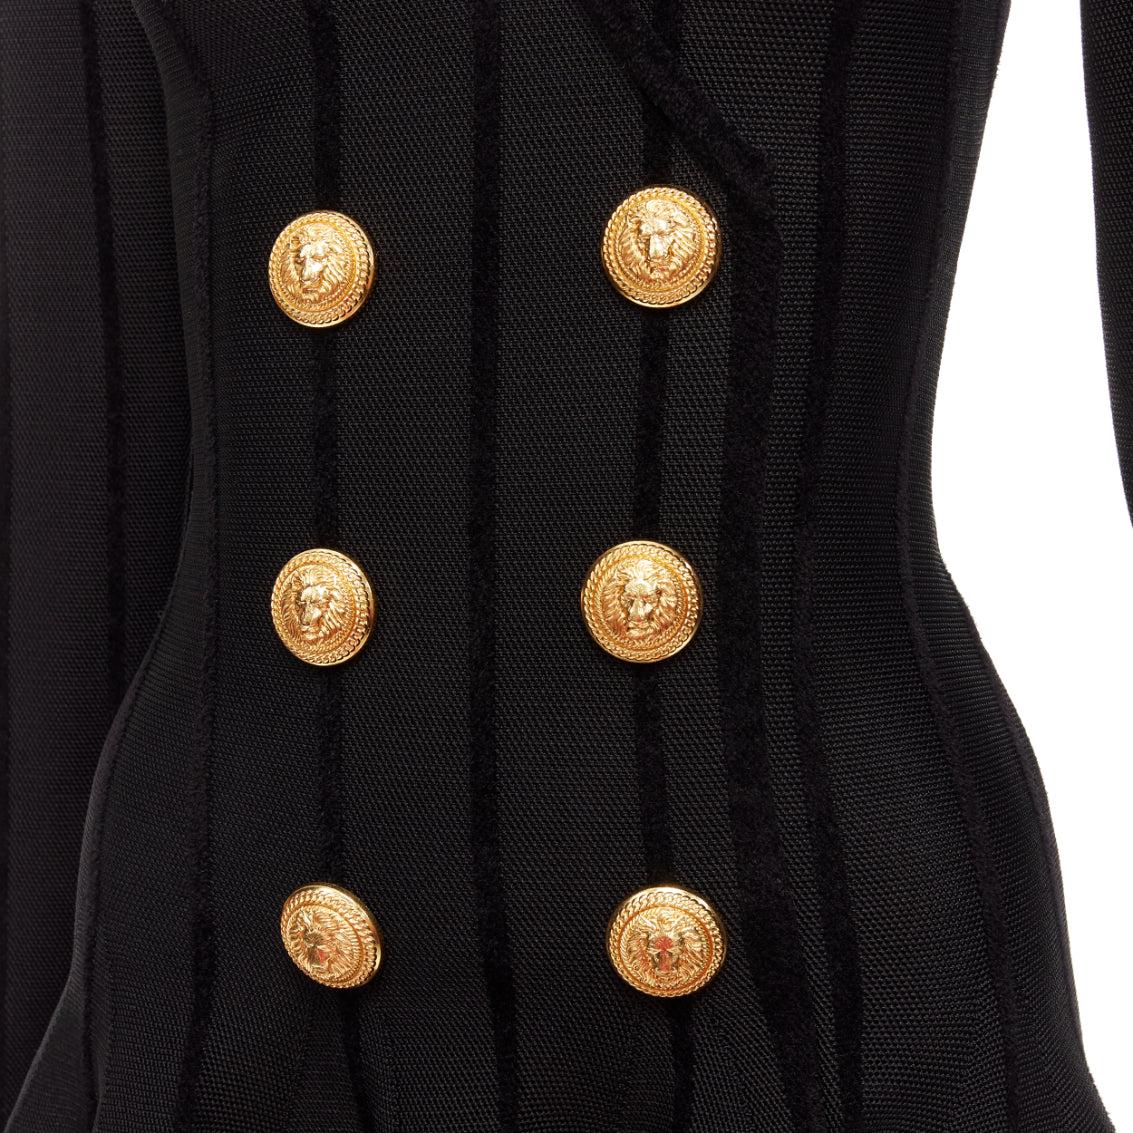 BALMAIN 2023 black striped chenille gold lion button mesh mini dress FR34 XS
Reference: AAWC/A00699
Brand: Balmain
Designer: Olivier Rousteing
Collection: 2023
Material: Viscose, Polyamide
Color: Black, Gold
Pattern: Striped
Closure: Zip
Extra